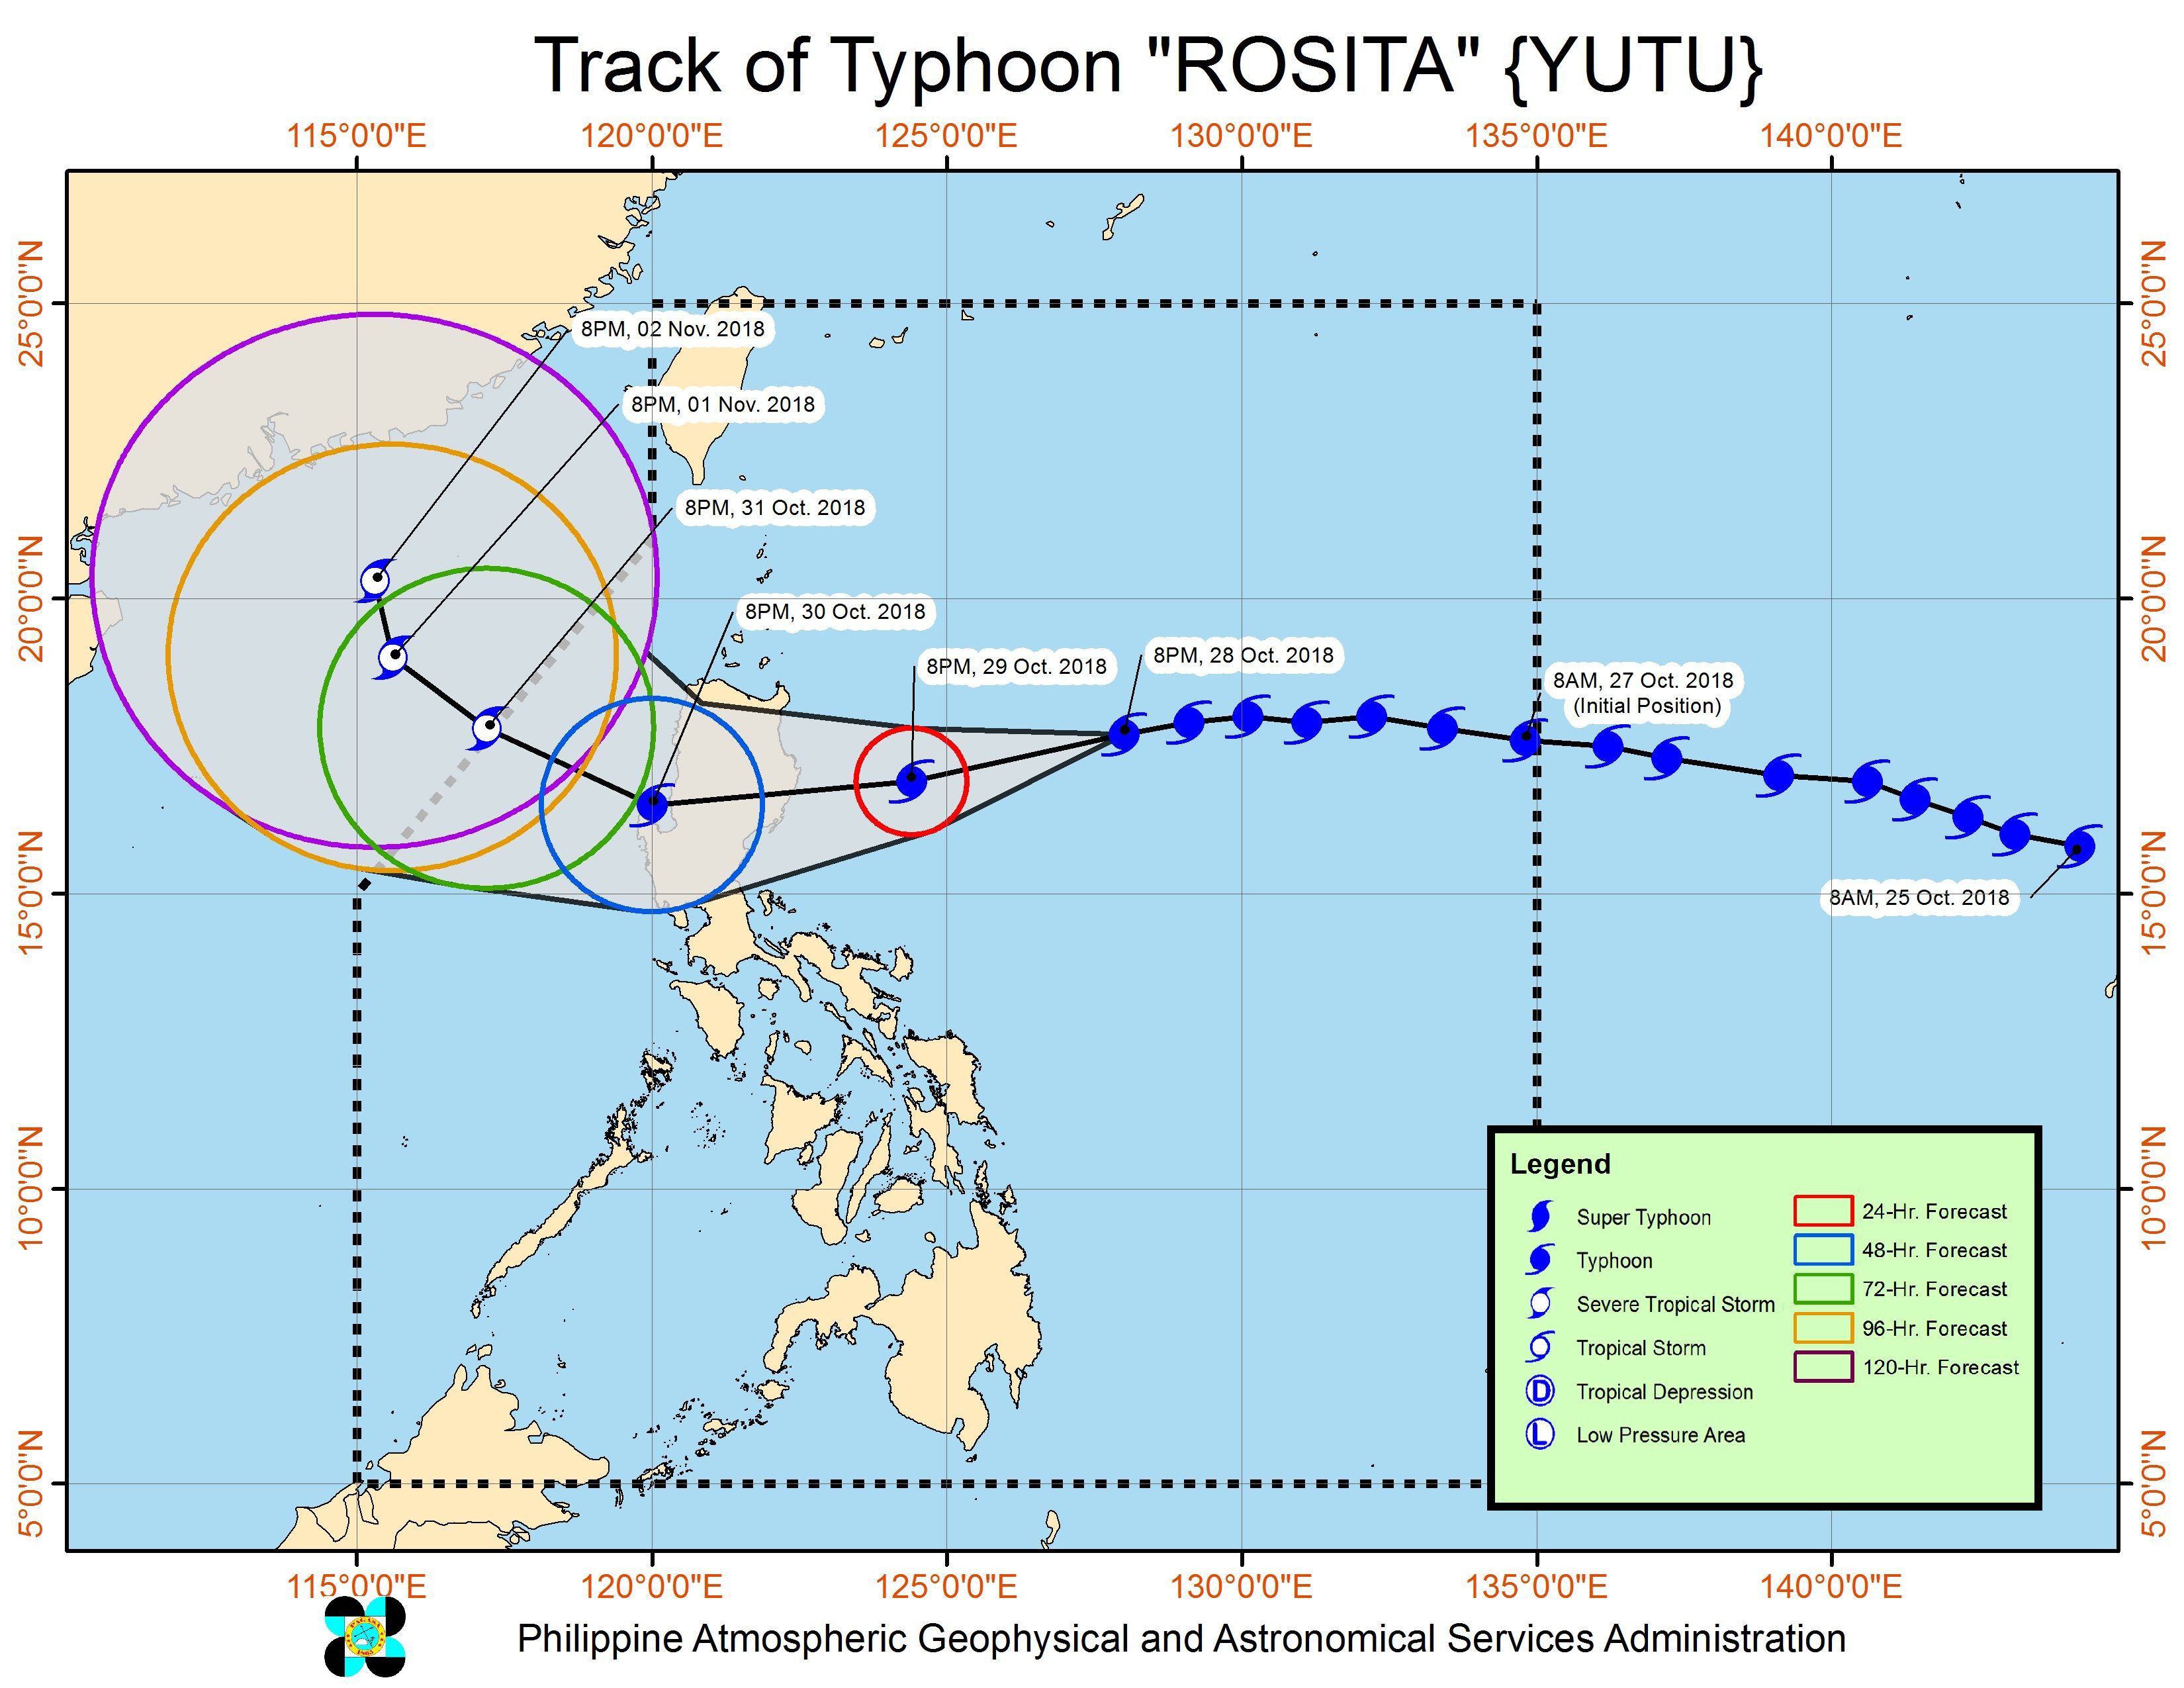 Forecast track of Typhoon Rosita (Yutu) as of October 28, 2018, 11 pm. Image from PAGASA 